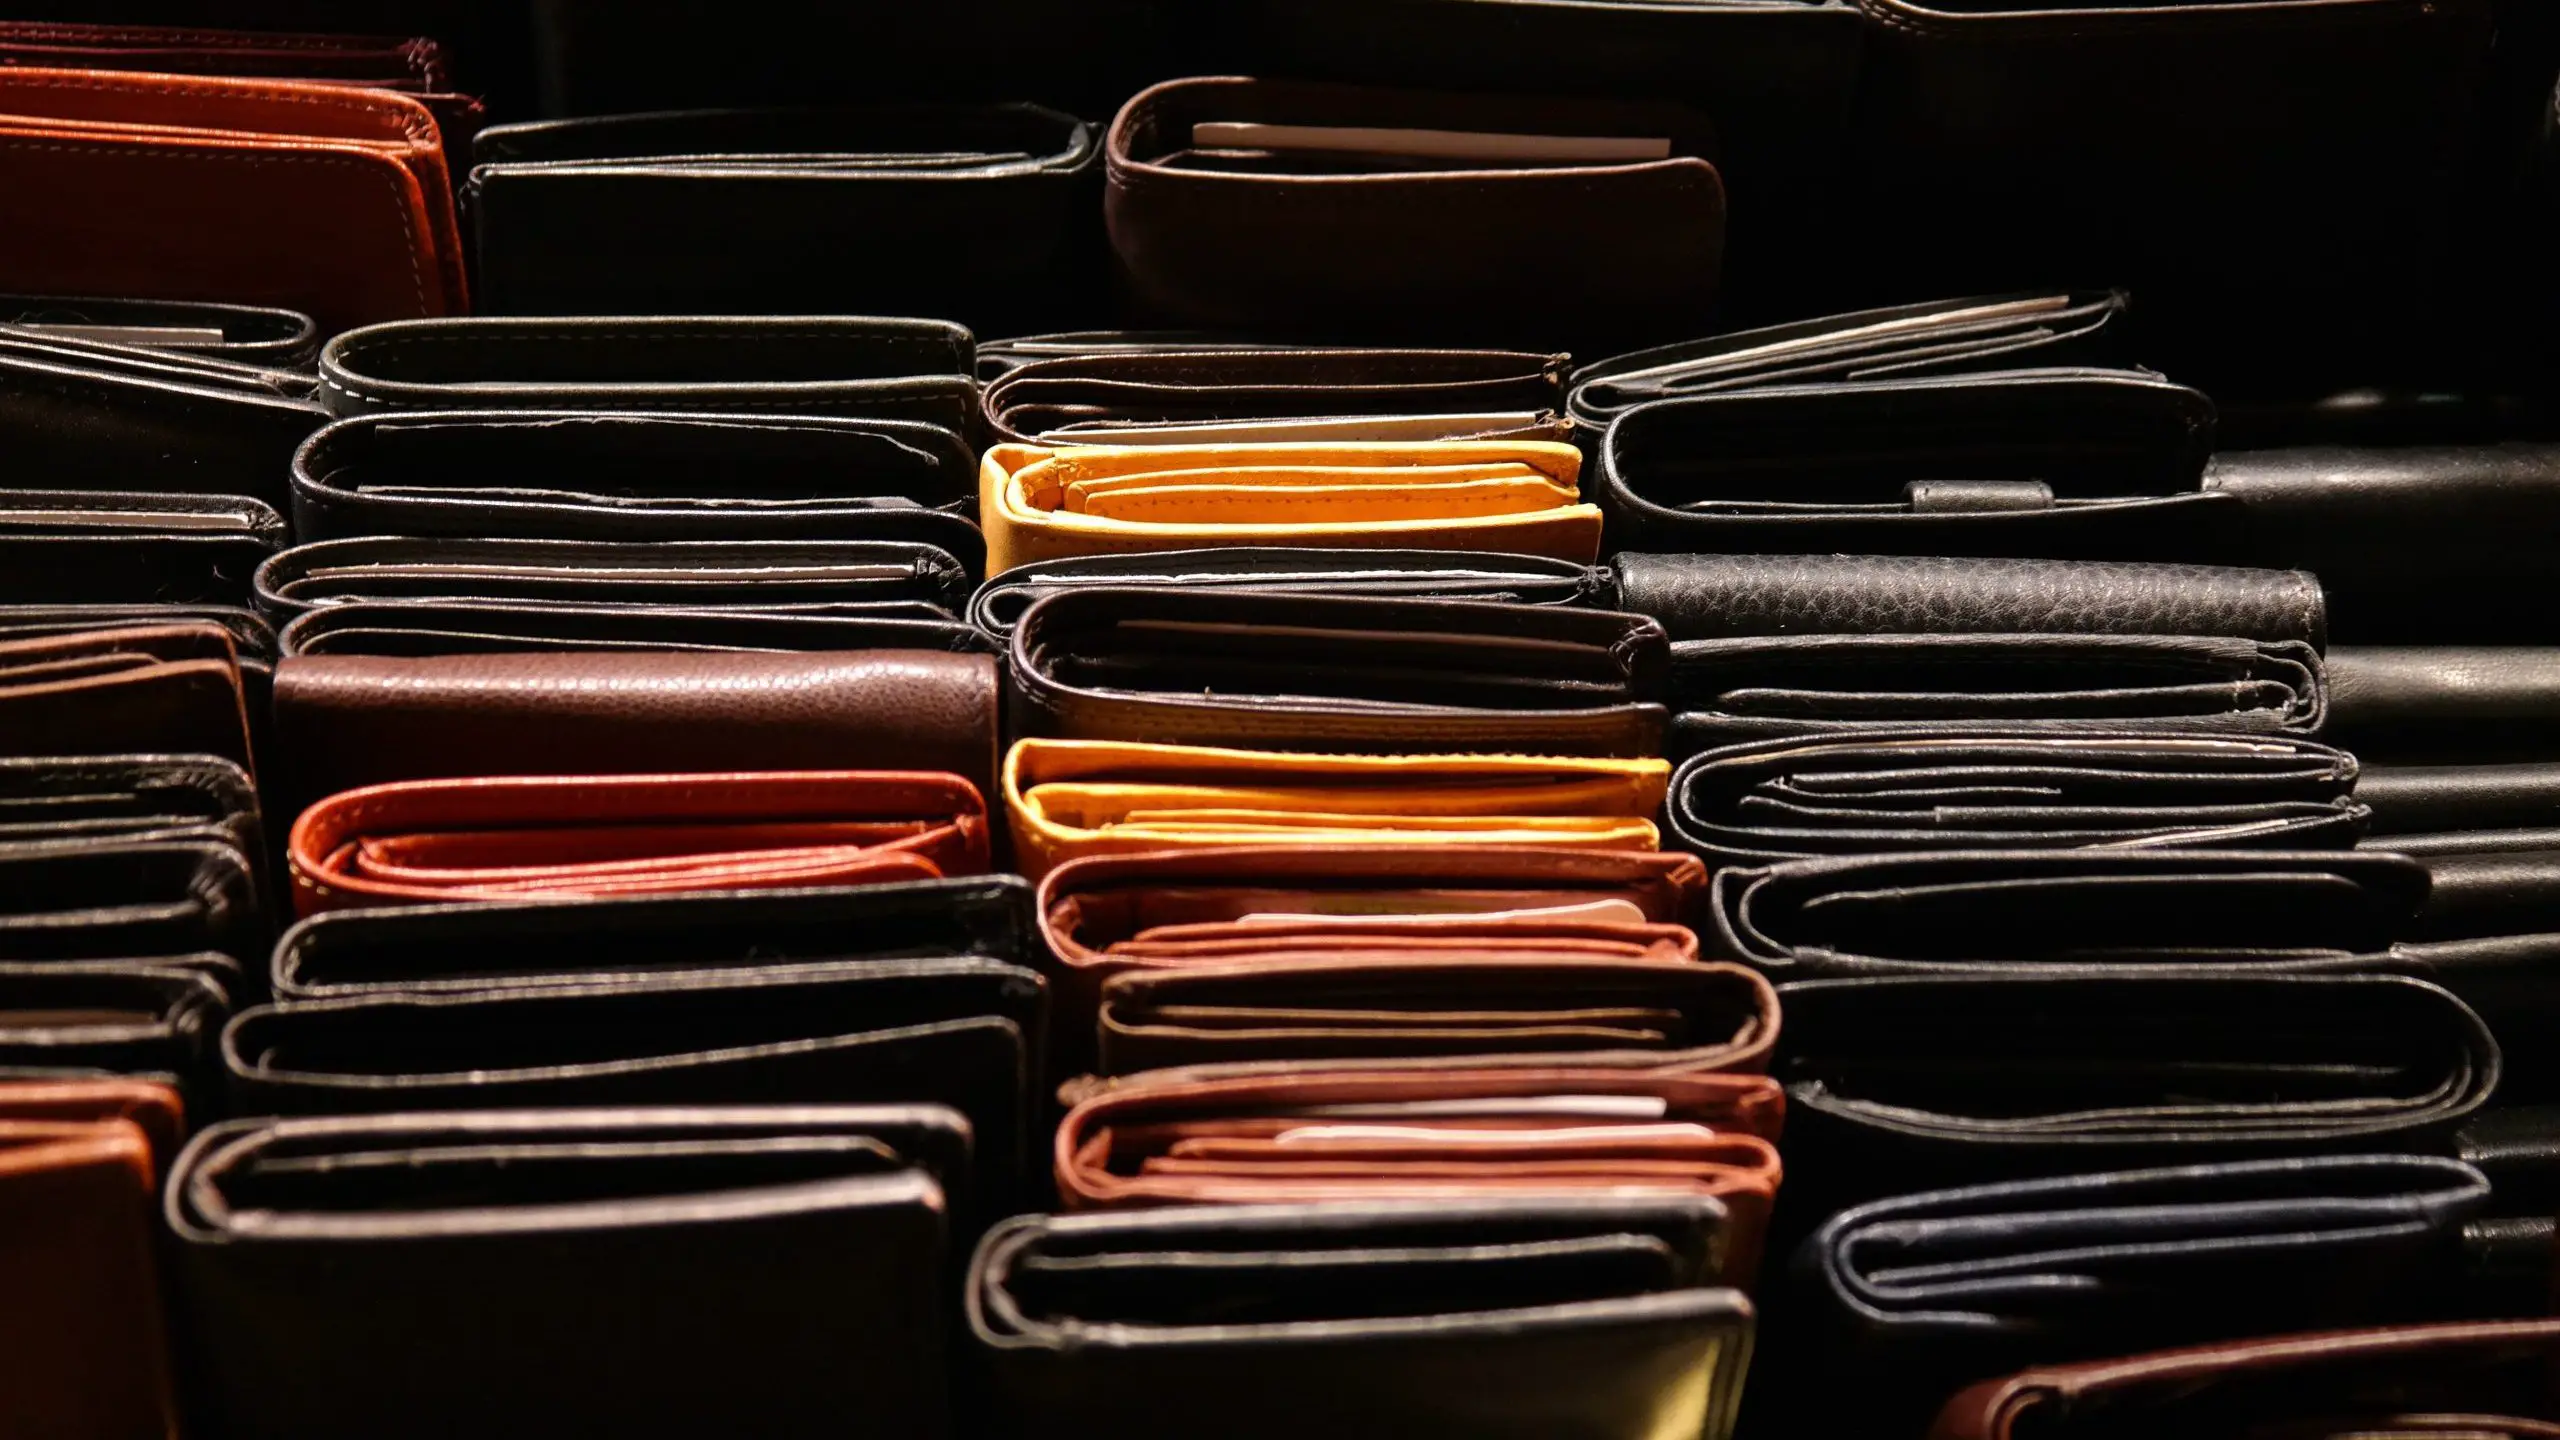 types of wallets for men- image of a stacks of wallets